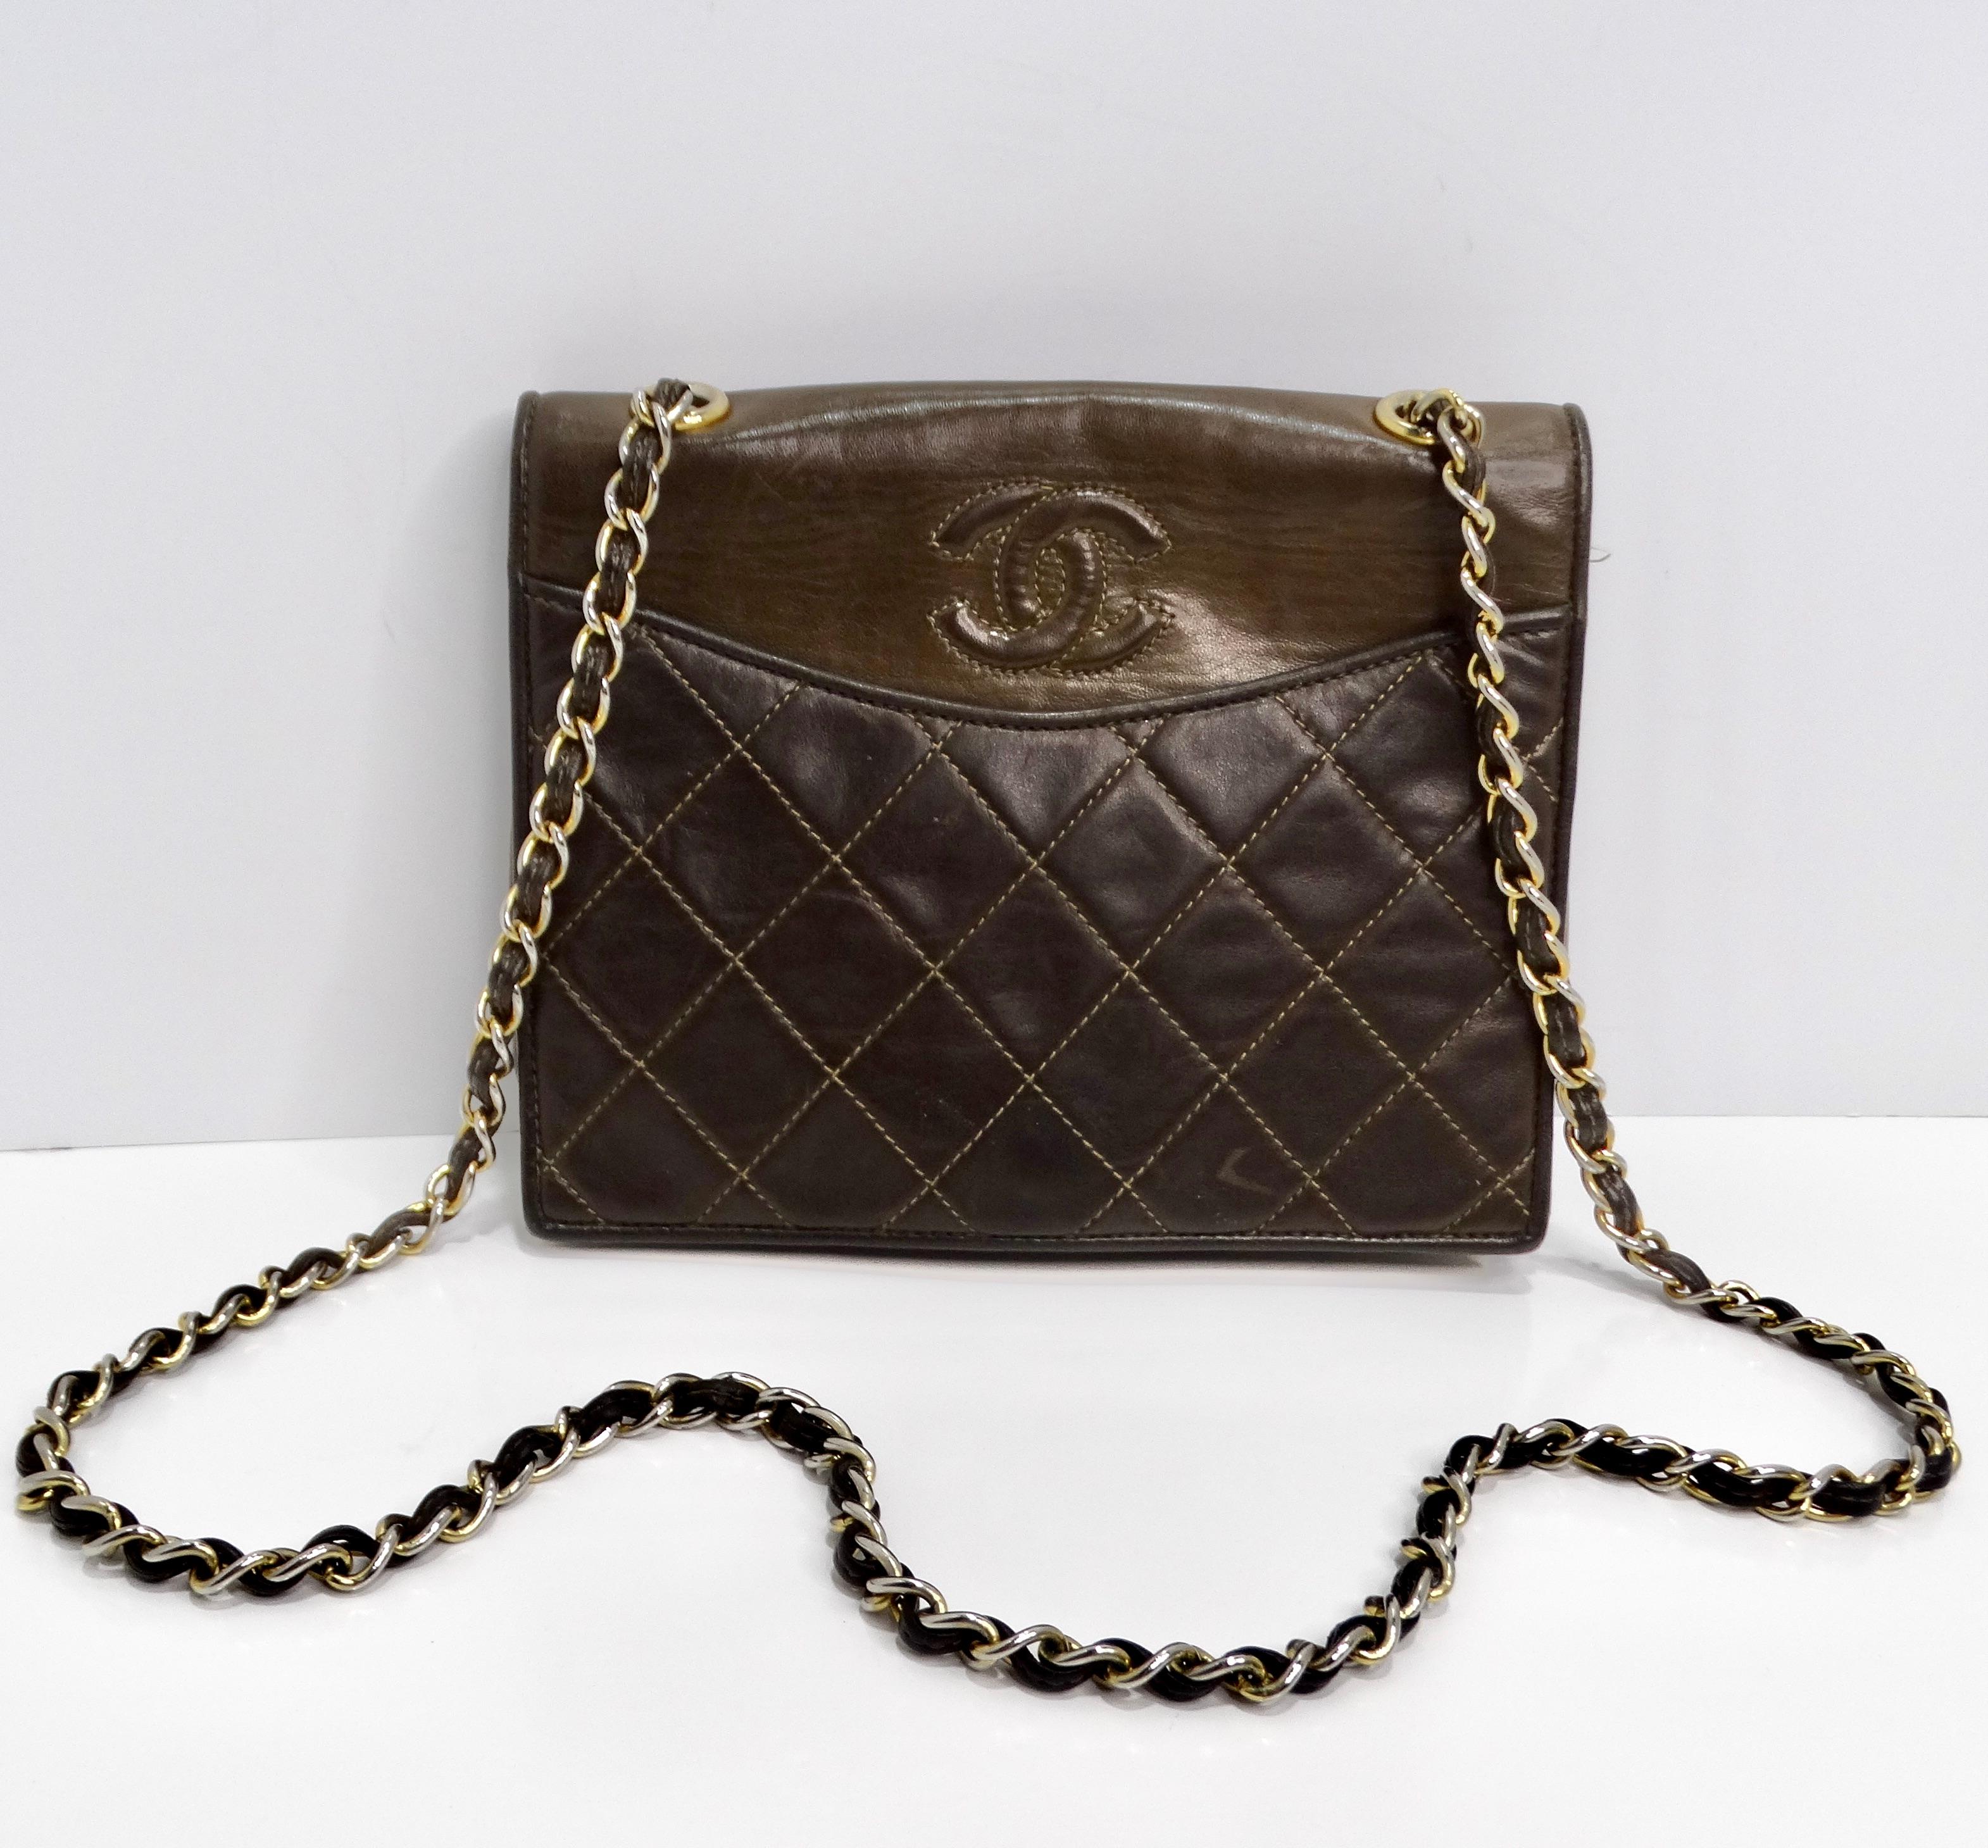 The Chanel 1980s Brown Lambskin Crossbody Bag is indeed a classic and versatile accessory. With its quilted fold-over flap adorned with the iconic CC logo, it exudes elegance and sophistication. The combination of brown lambskin leather and